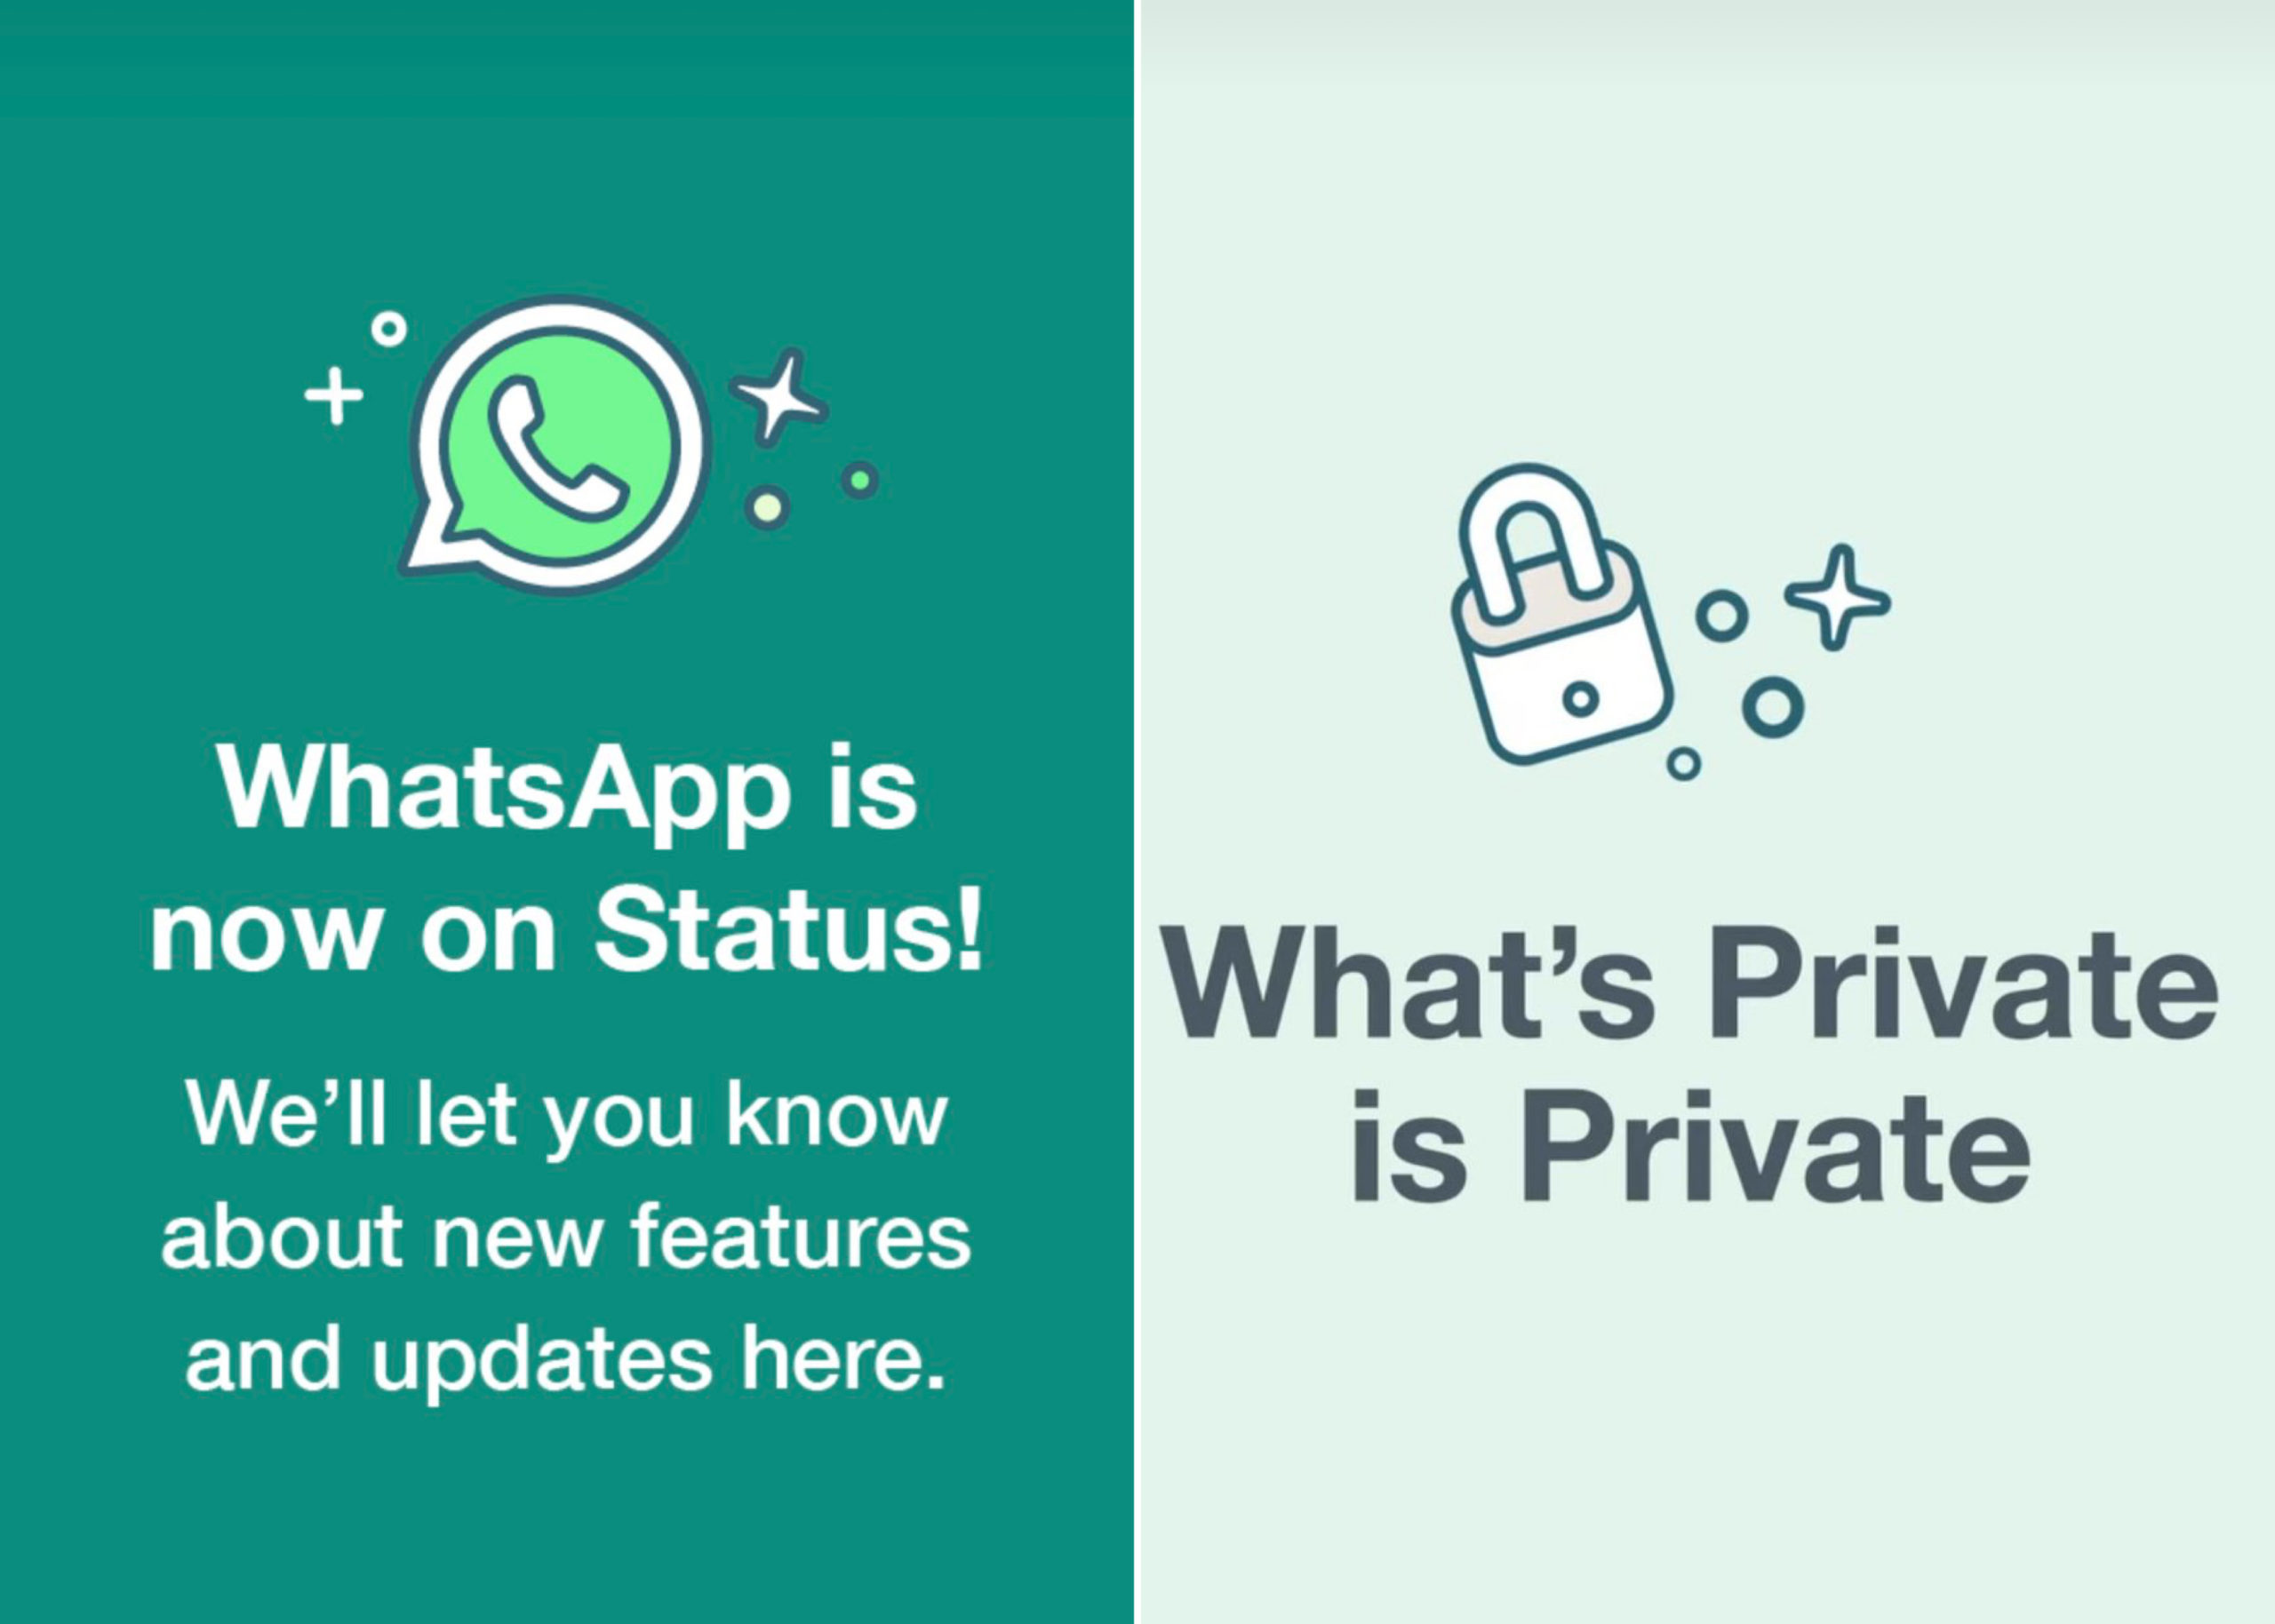 ‘Mark Zuckerberg Is Invading Privacy’ - Nigerians React As WhatsApp Joins Status To Share Features, Updates